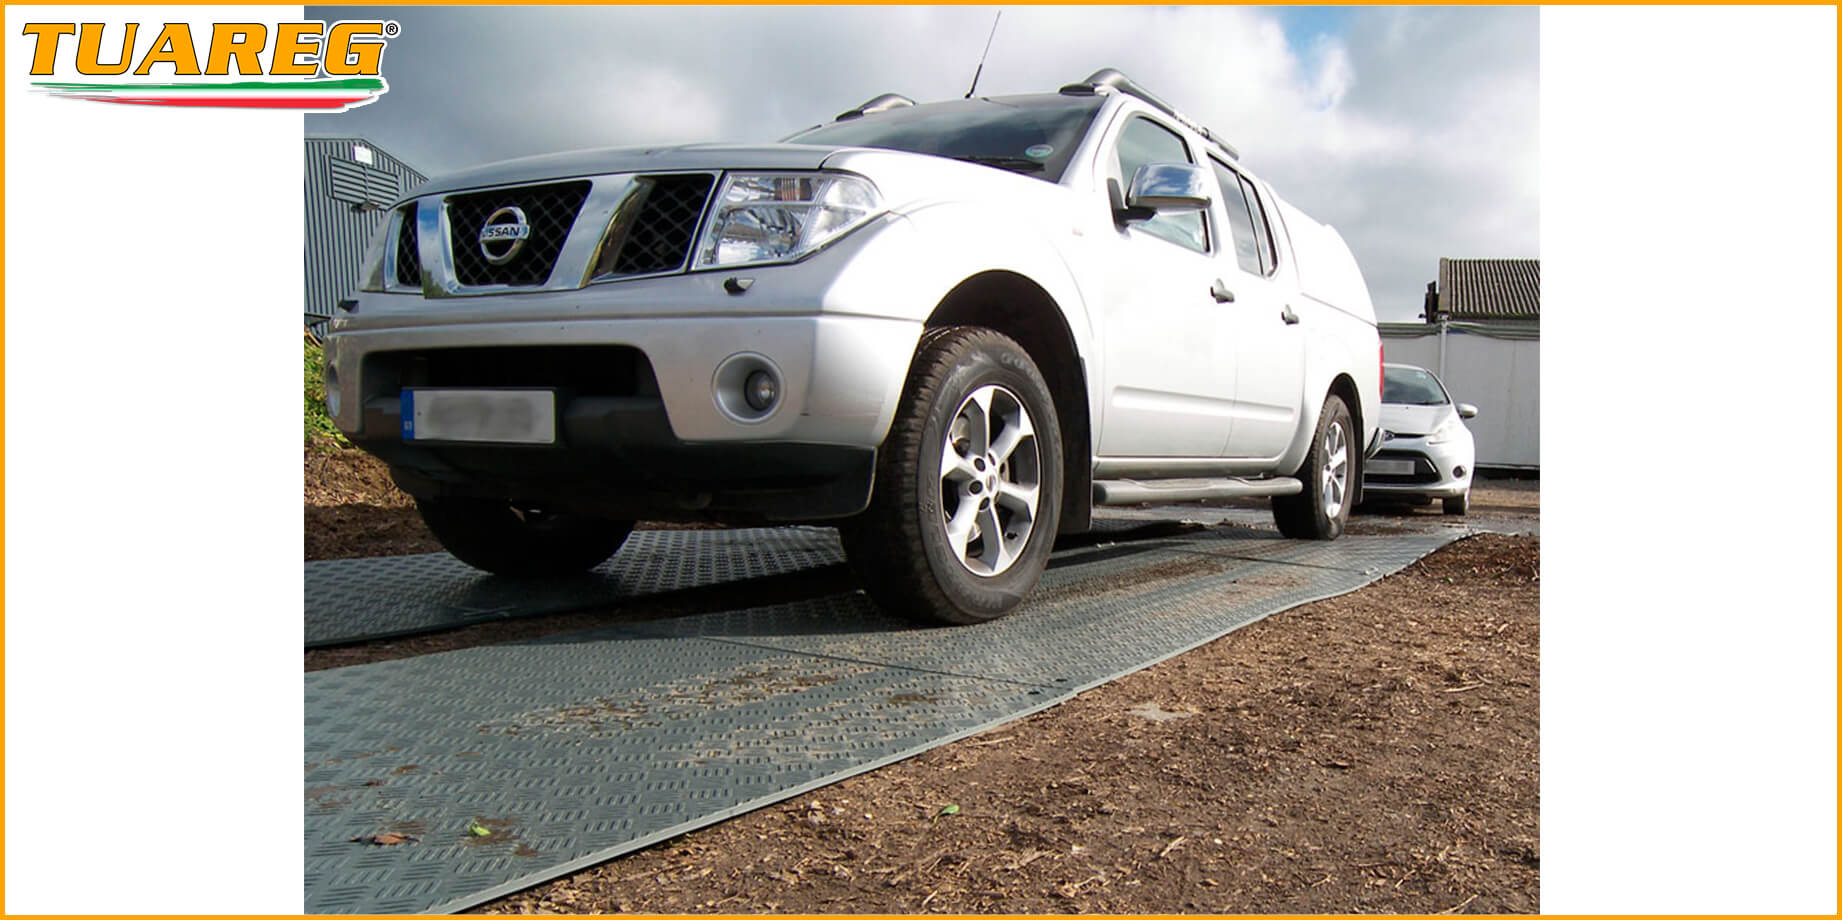 Drive-over Beach Carpet / Walkway - Tuareg Access - Product/Accessory for Beach Accessibility